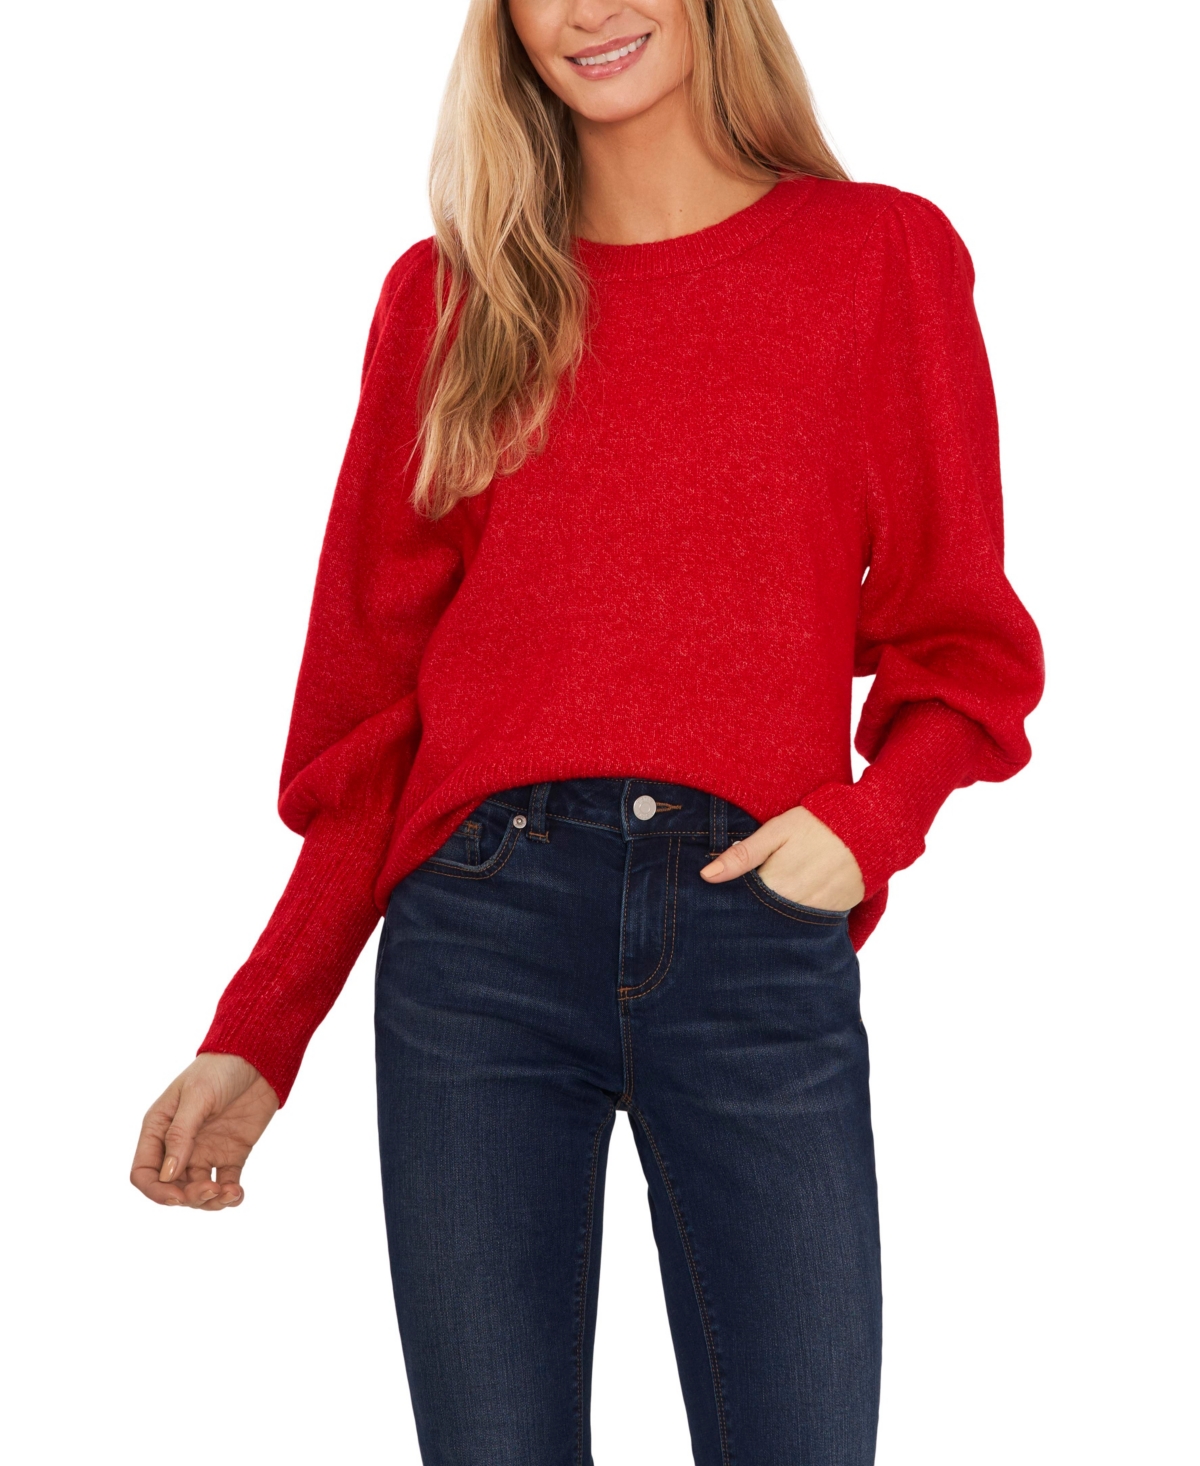 Victorian Blouses, Tops, Shirts, Vests, Sweaters CeCe Womens Puff Long Sleeve Crew Neck Sweater - Luminous Red $34.50 AT vintagedancer.com